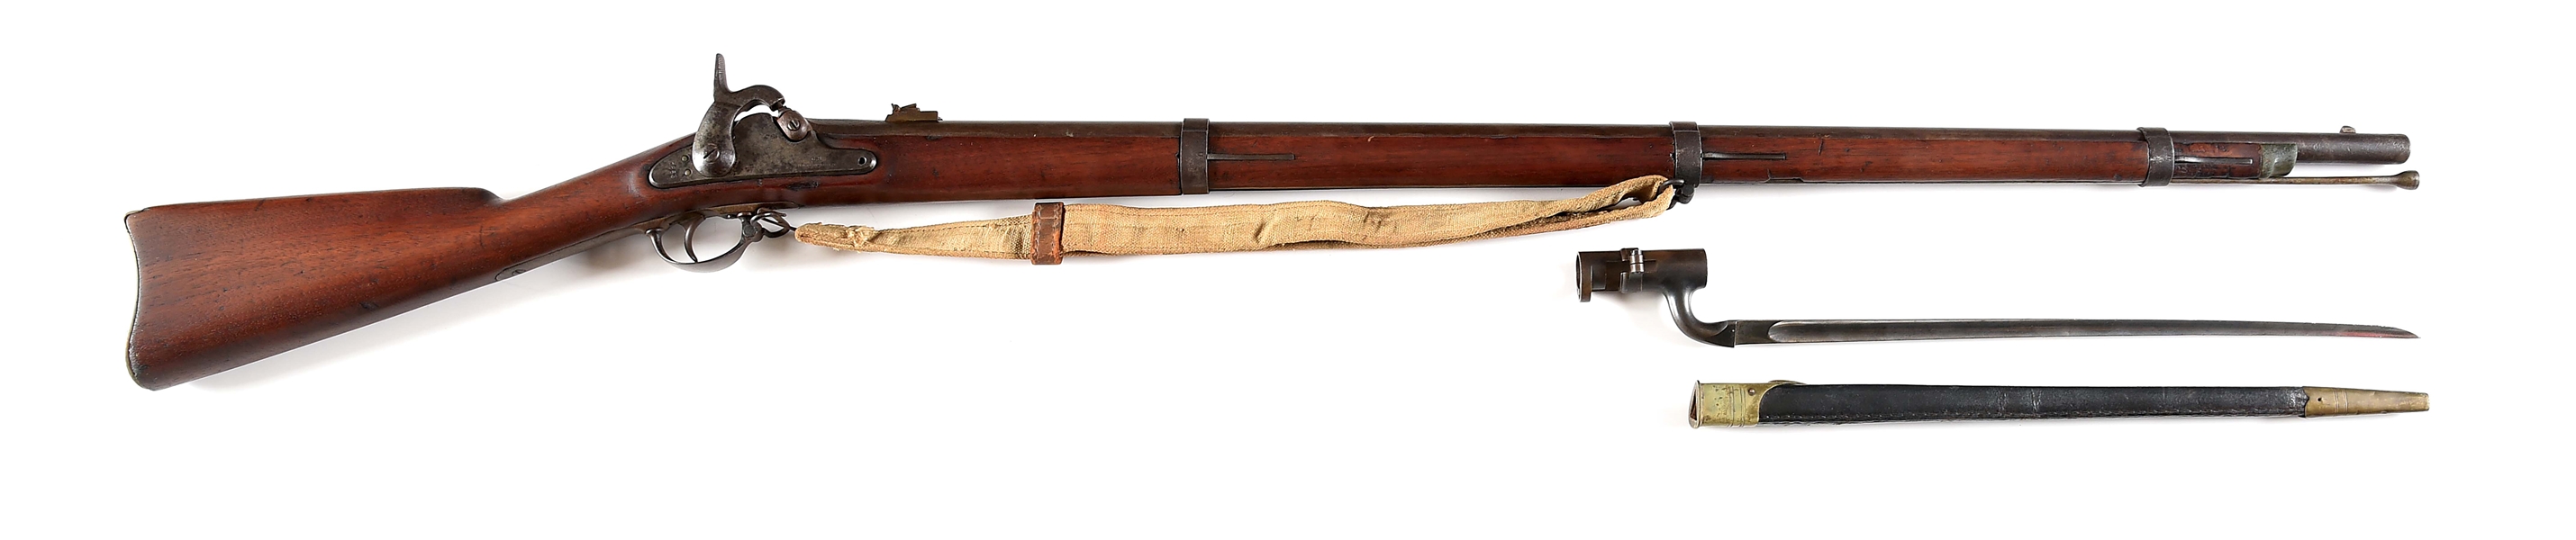 (A) RICHMOND TYPE III RIFLE MUSKET DATED 1863 WITH CONFEDERATE SLING, BAYONET, AND SCABBARD.